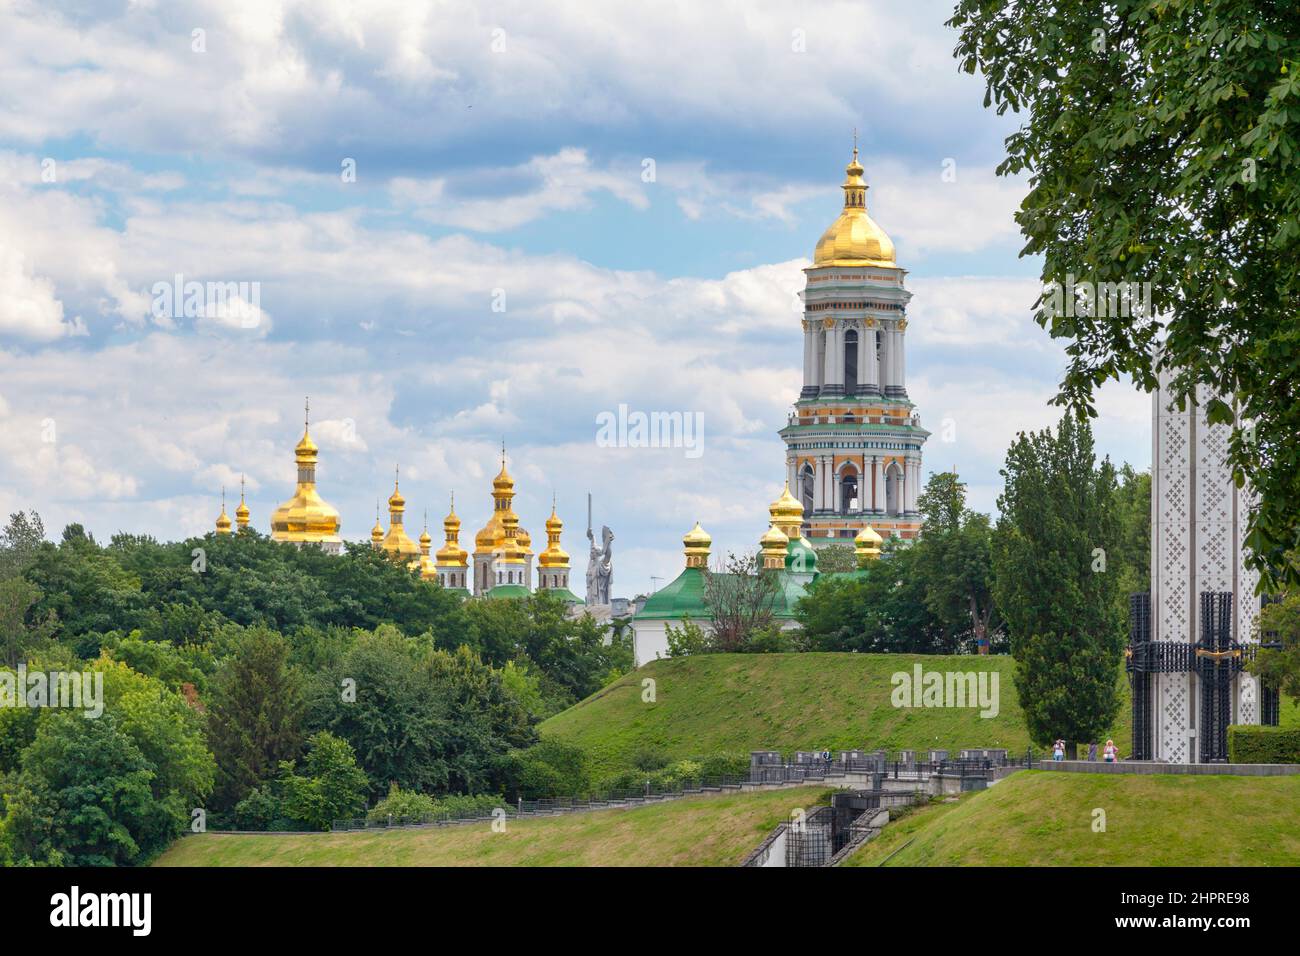 Kiev, Ukraine - July 04 2018: The Park of Eternal Glory is a public park hosting some of the best monuments in the capital. Stock Photo